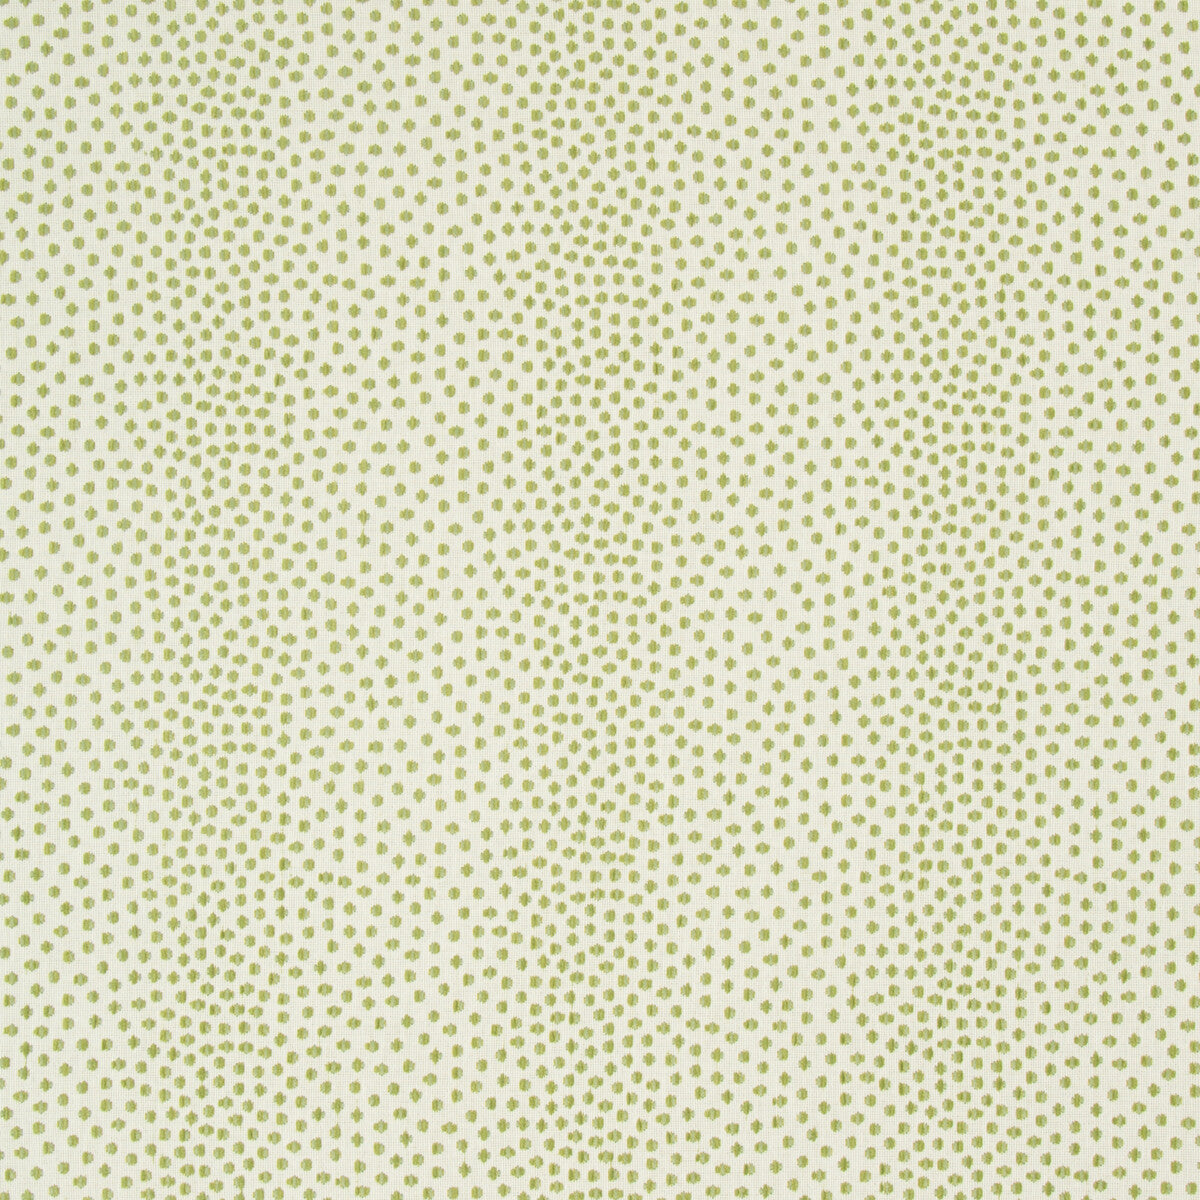 Kravet Contract fabric in 34748-13 color - pattern 34748.13.0 - by Kravet Contract in the Crypton Incase collection